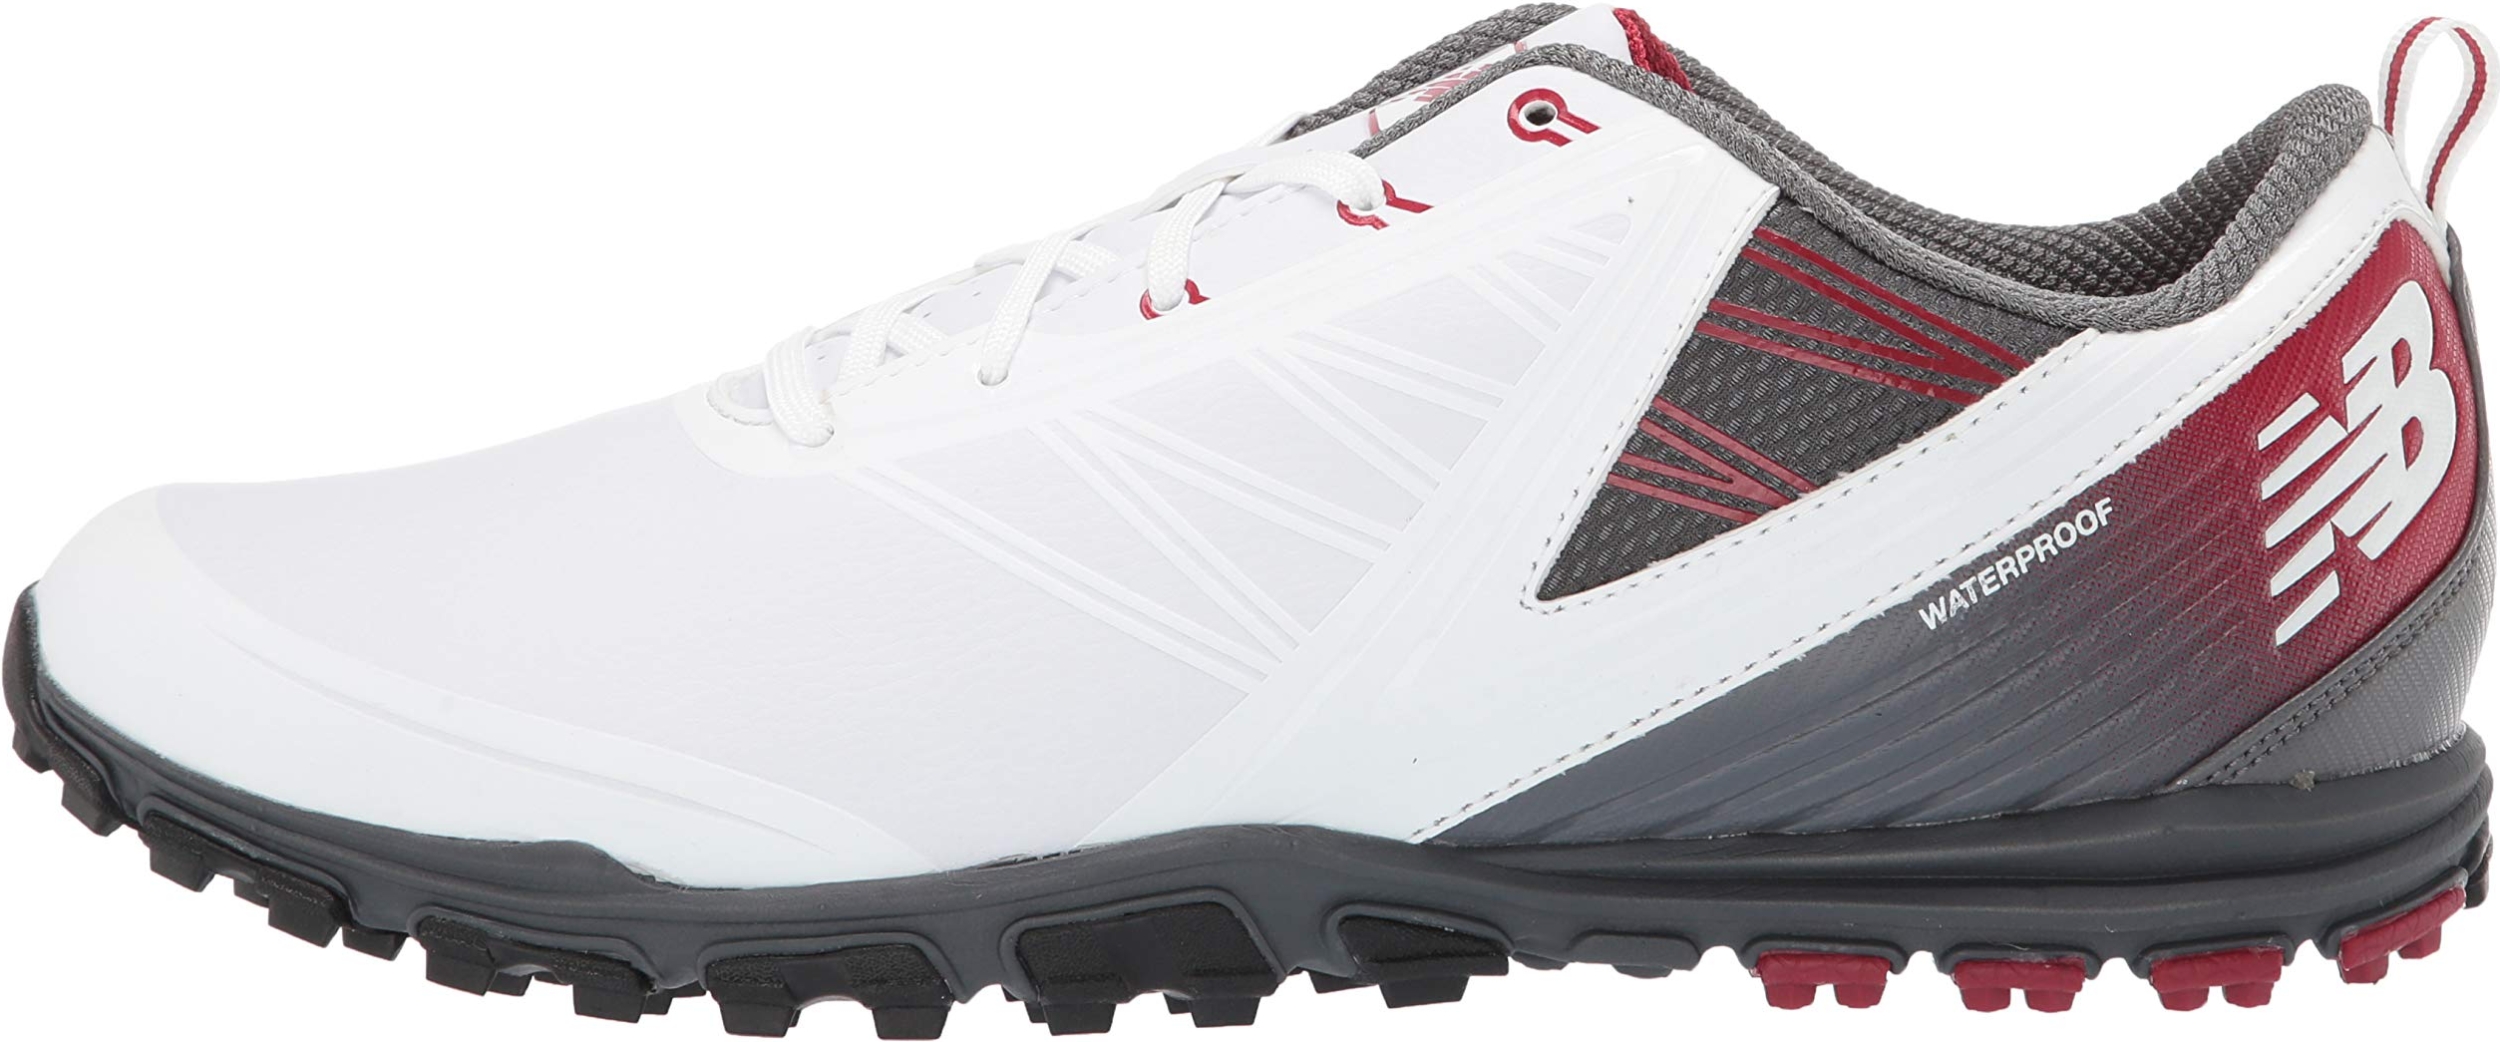 9 New Balance golf shoes: Save up to 50% | RunRepeat